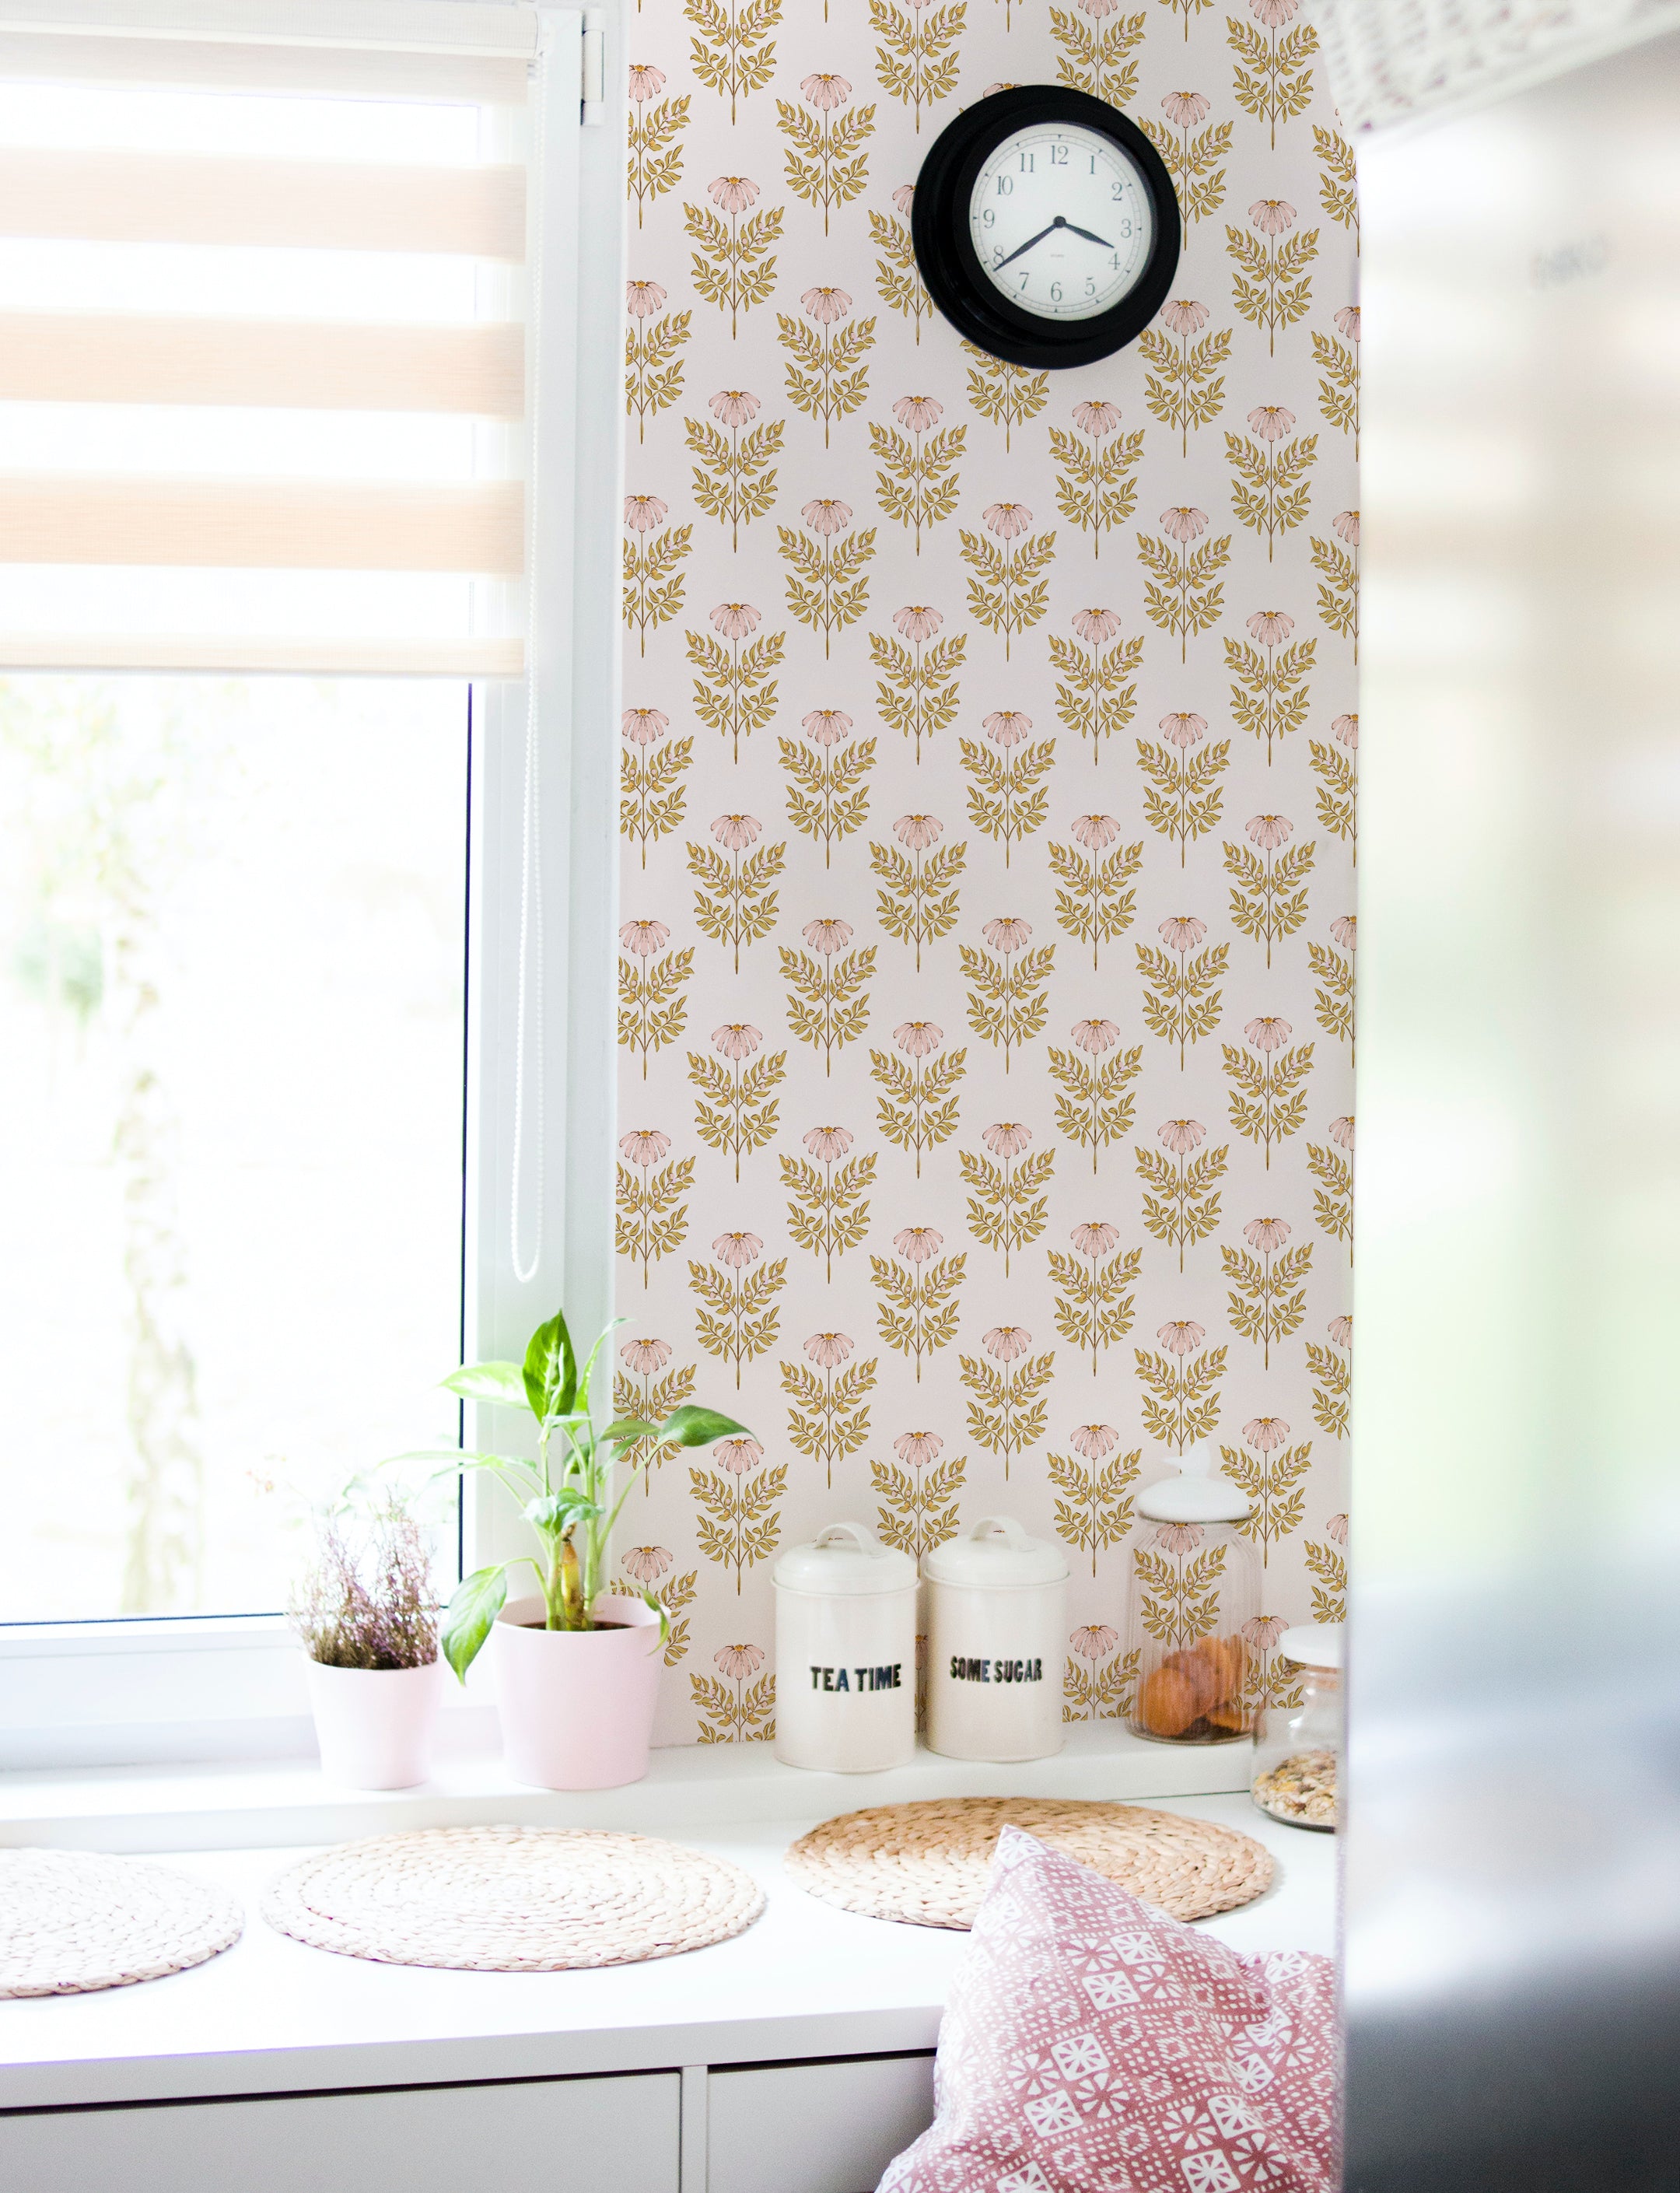 A cozy kitchen nook enhanced by the Ditsy Daisy Wallpaper - Small, featuring elegant small pink flowers and golden leaves on a soft background. The area is styled with a modern white bench, woven placemats, and simple kitchen canisters, creating a warm and inviting space.